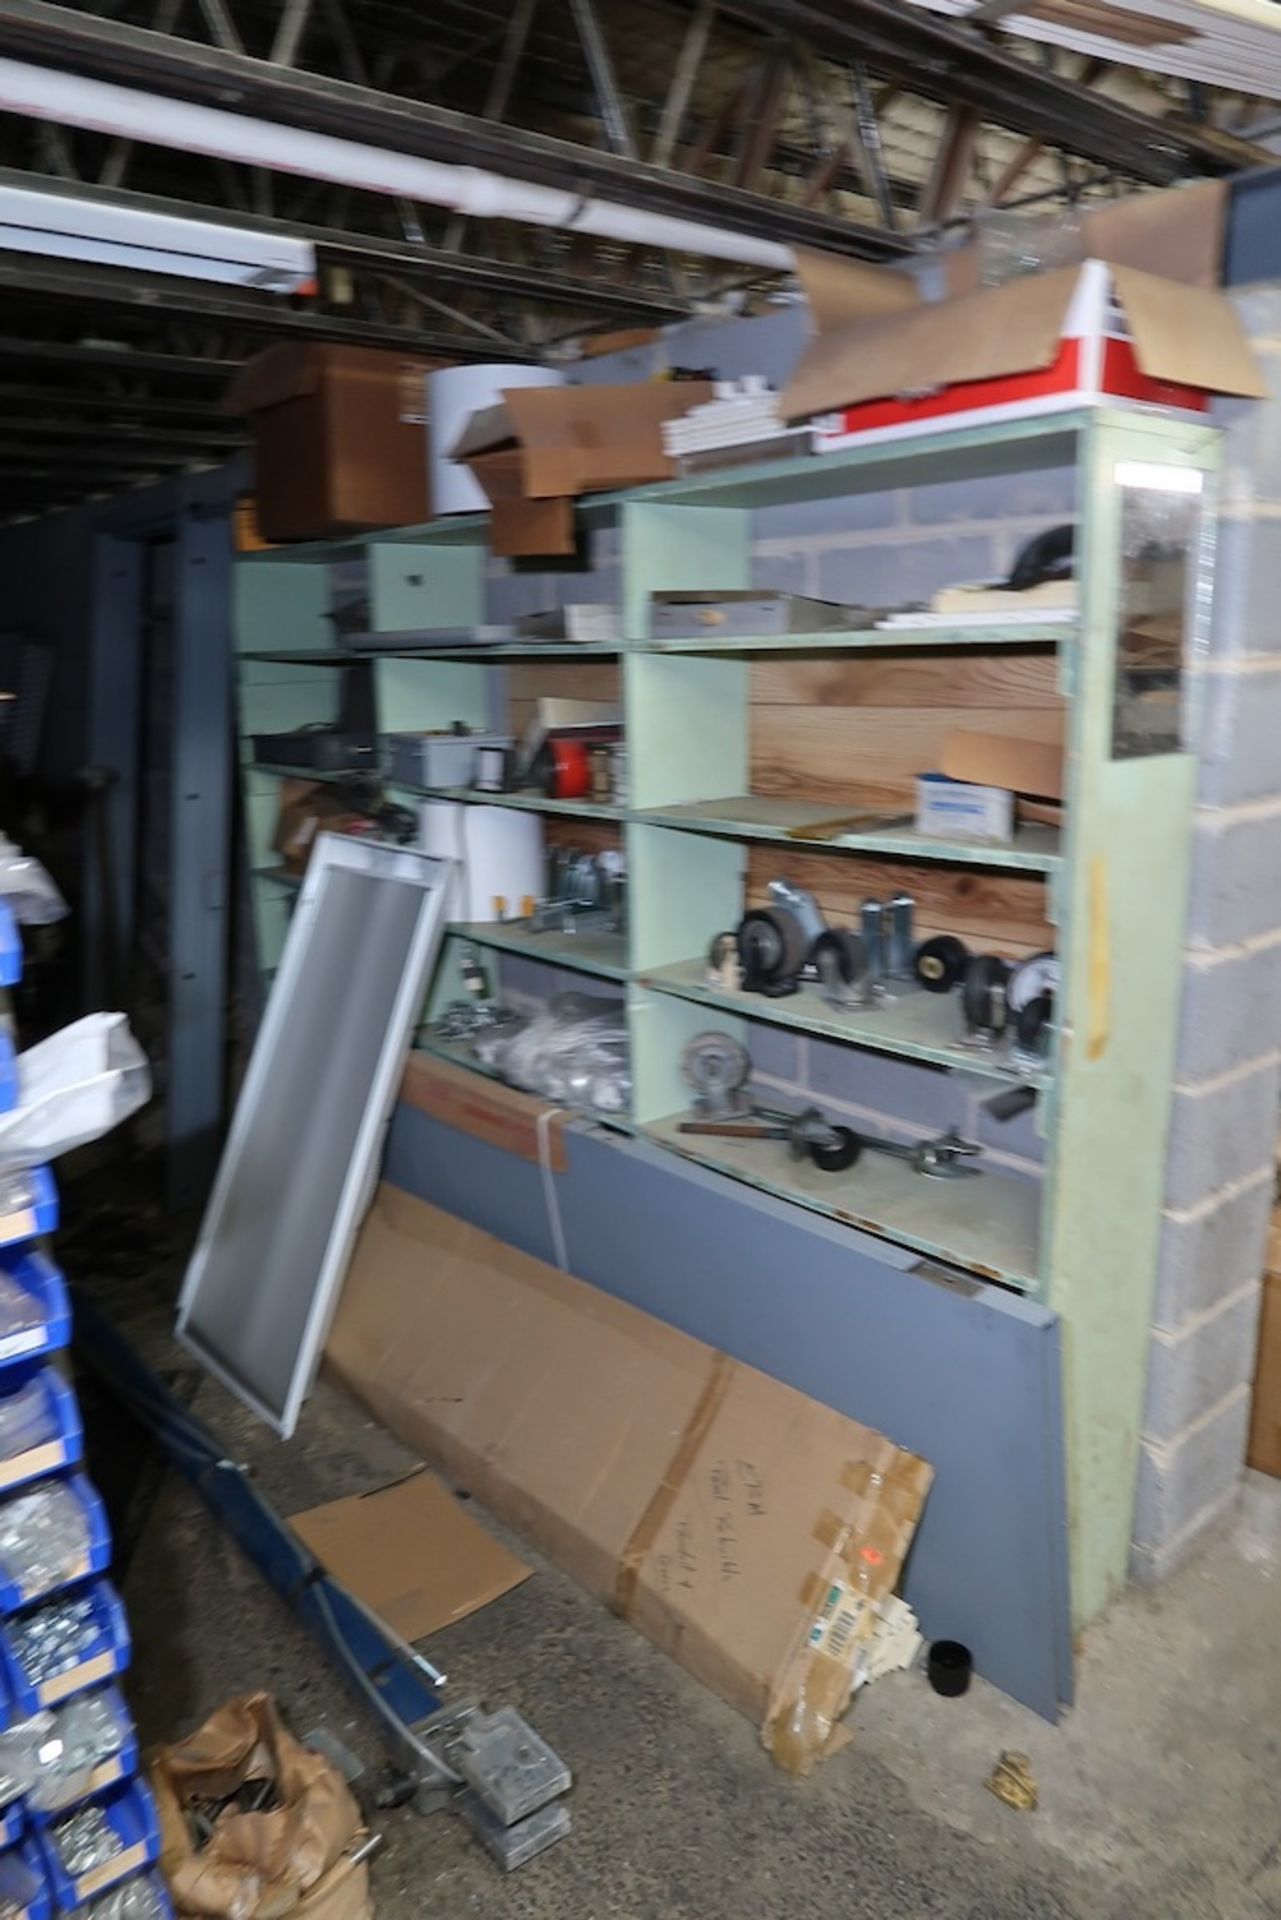 Remaining Contents of Under-Ramp Storage Room, Including Conveyor Parts and Rollers, Etc. - Image 21 of 21